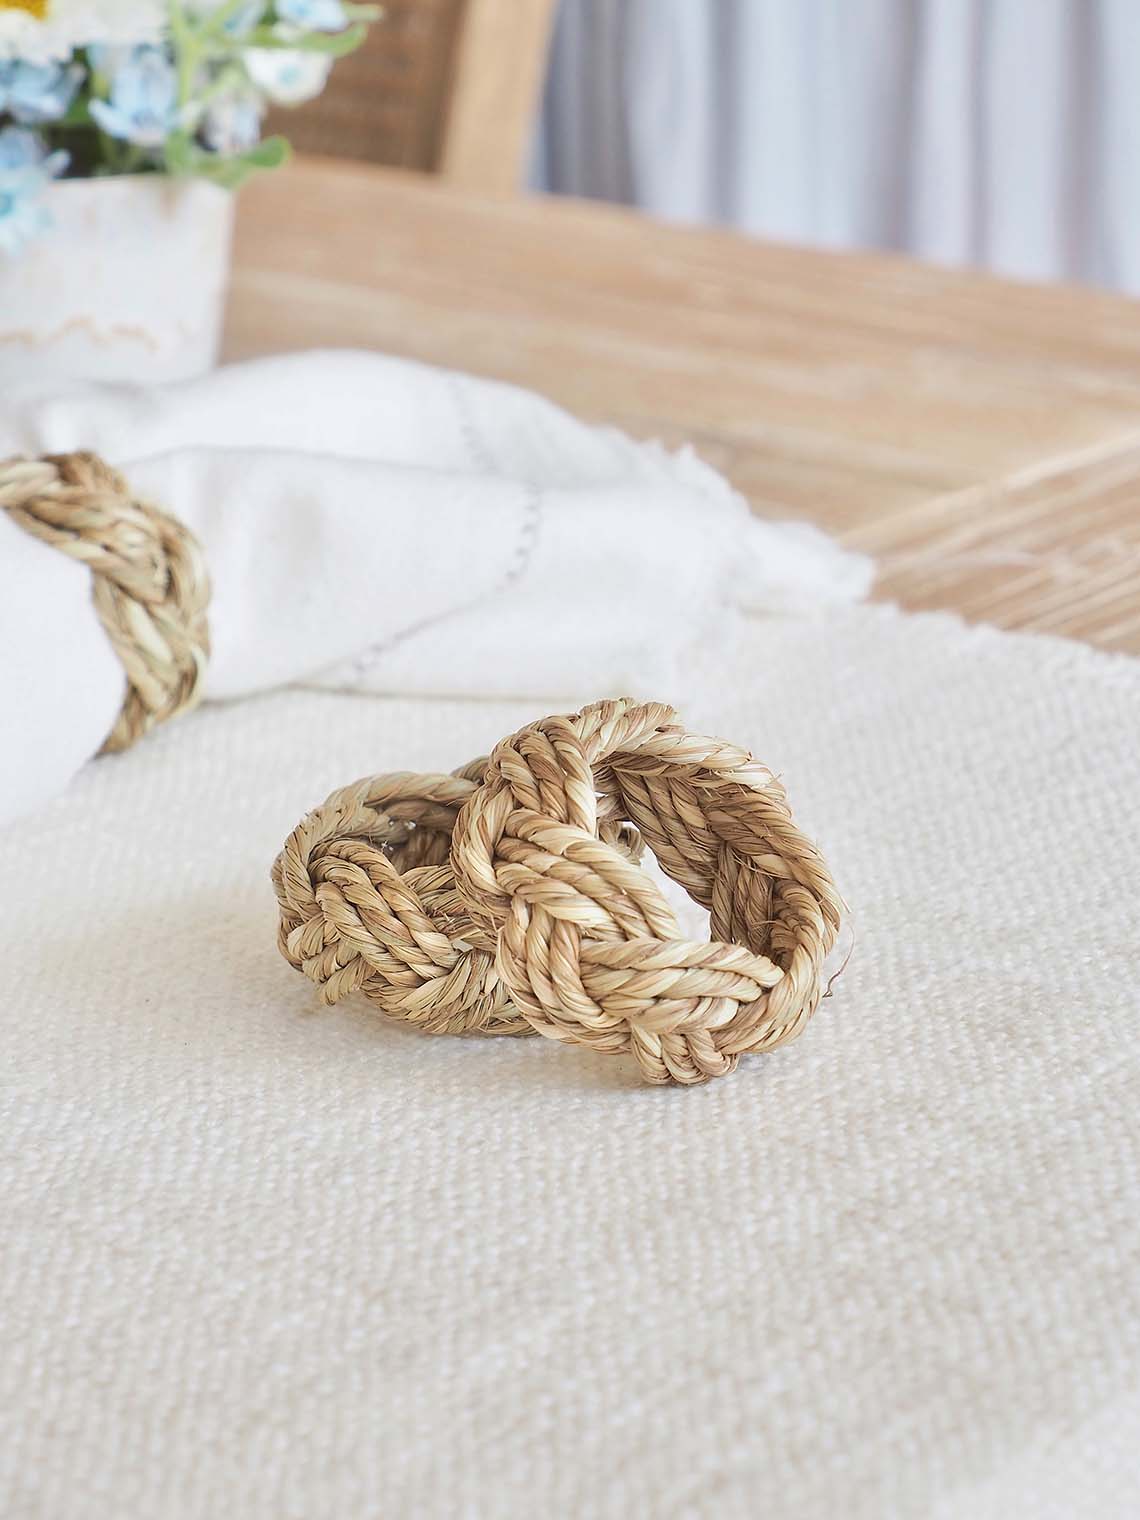 Braided Seagrass Napkin Ring